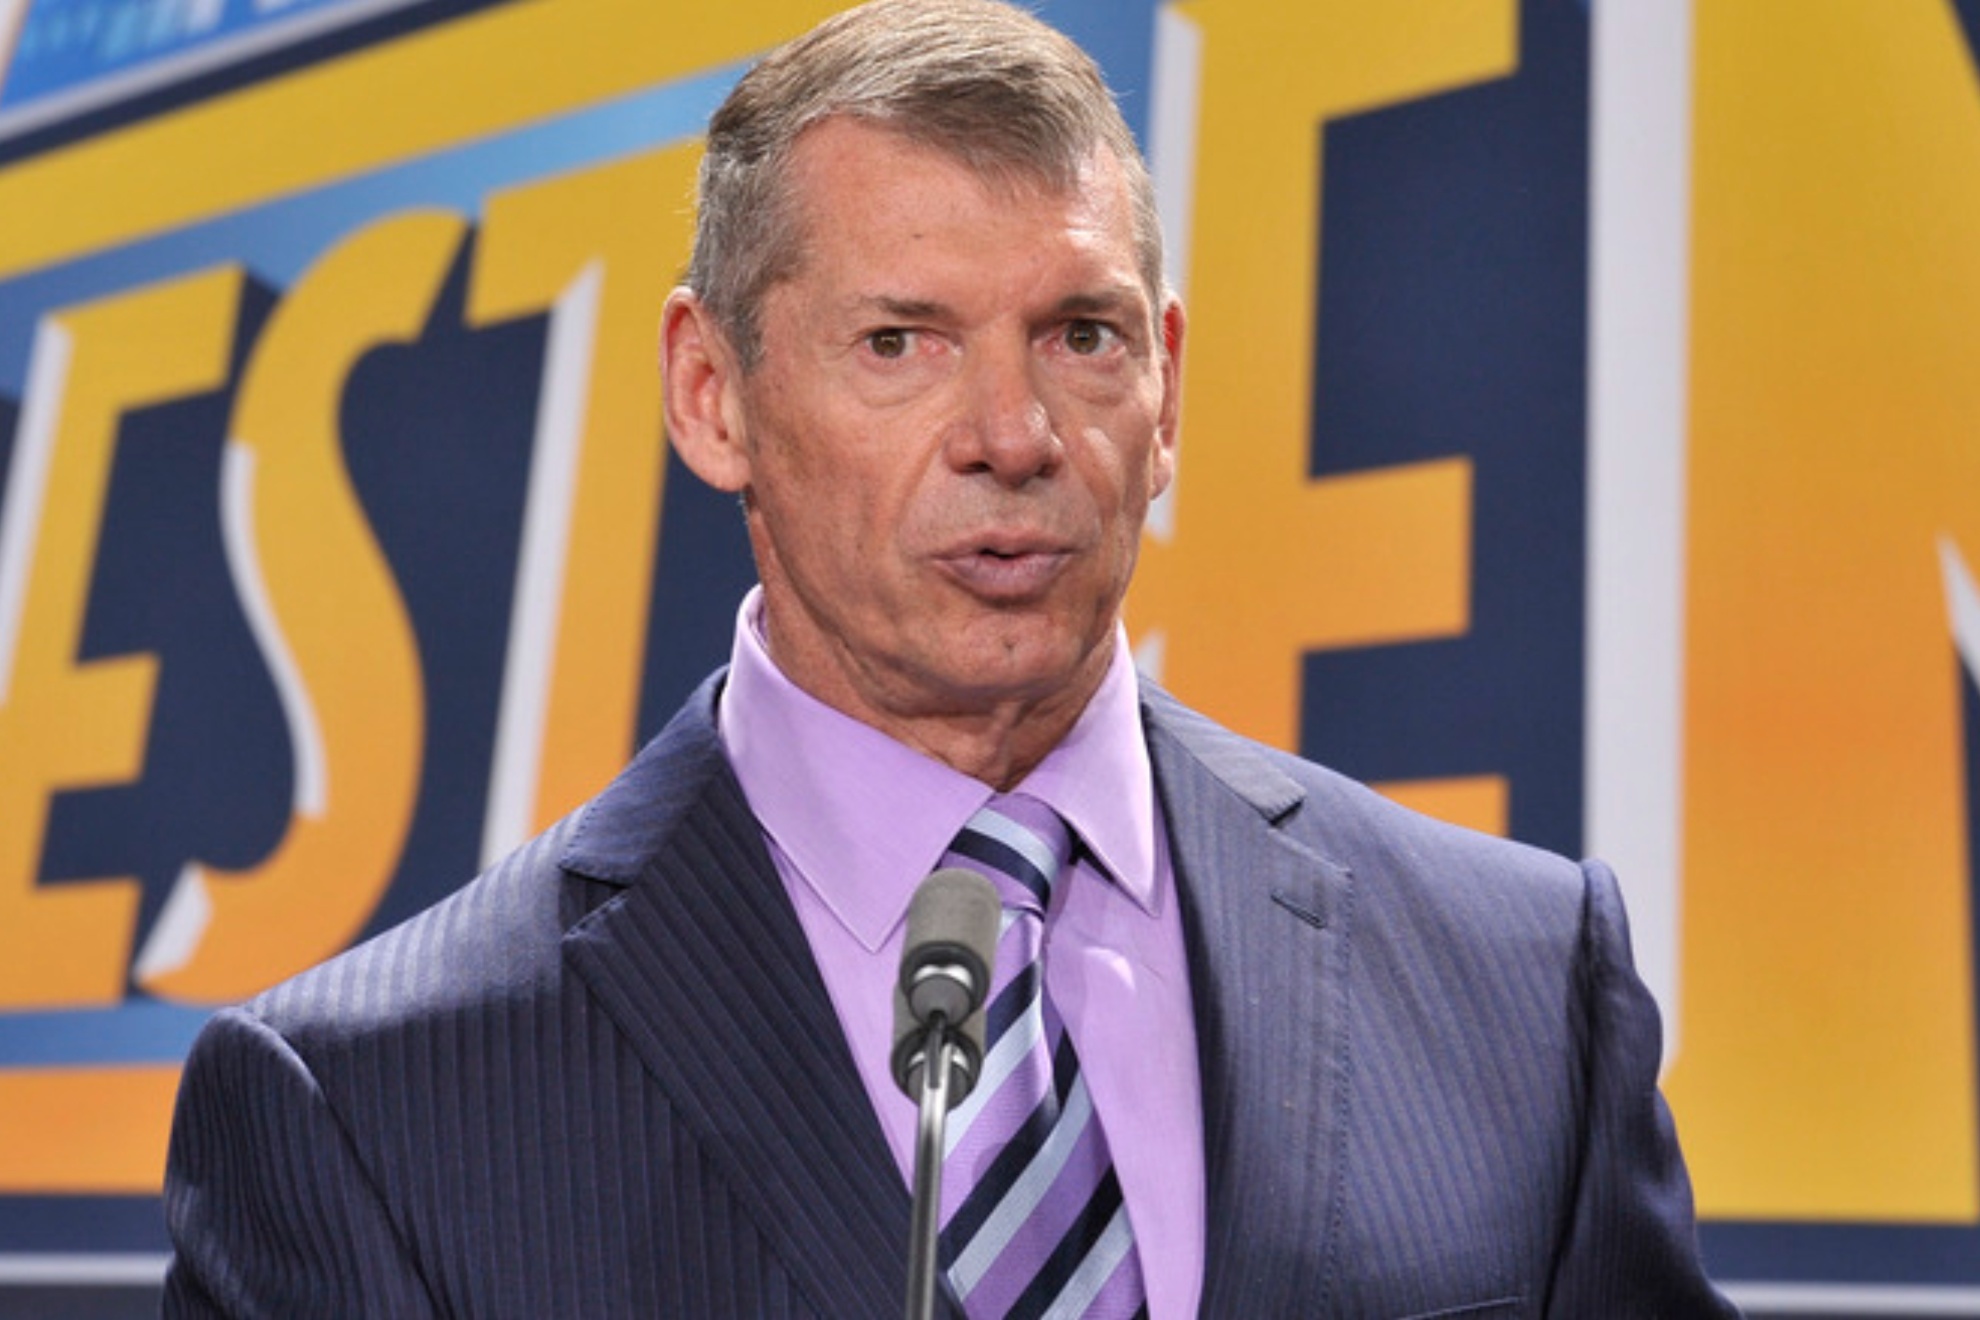 McMahon already survived a sexual harassment scandal. Will he do it again?